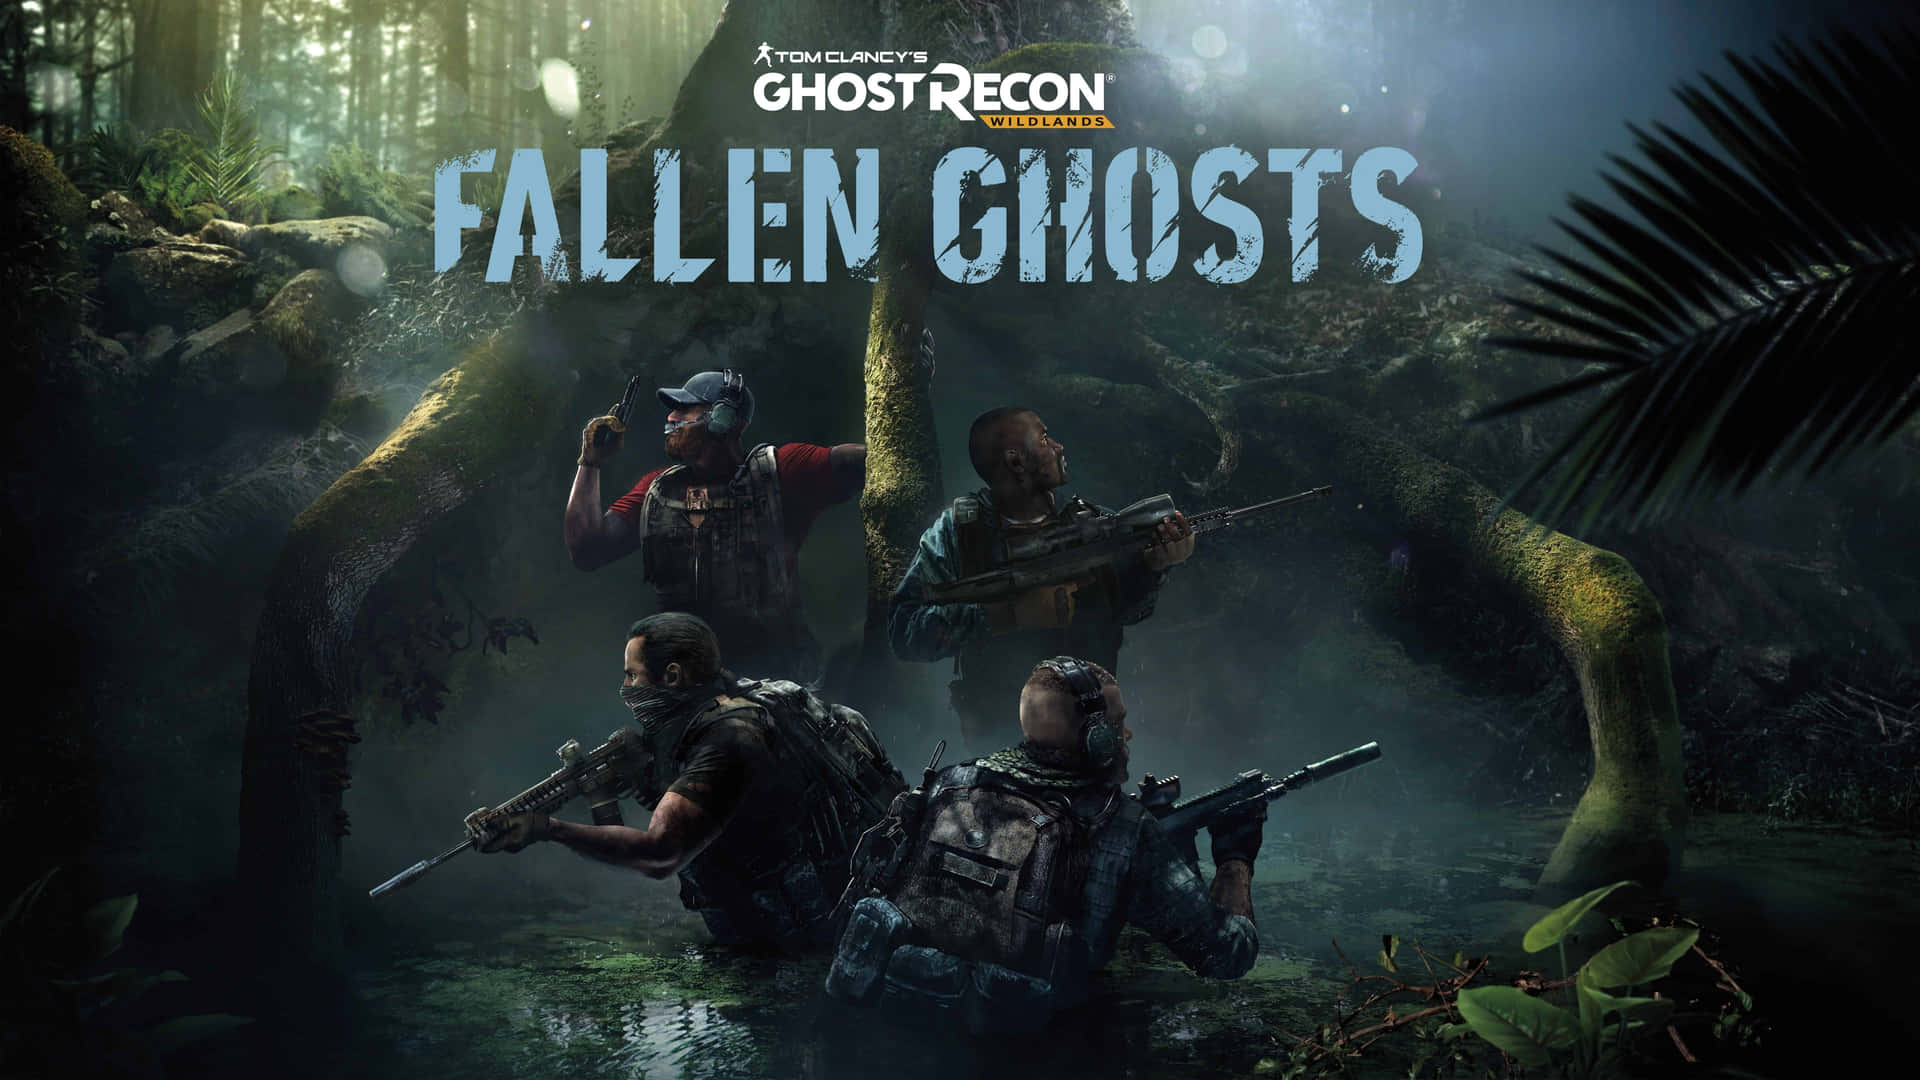 4k Ghost Recon Fallen Ghosts Soldiers Poster Pictures Wallpaper